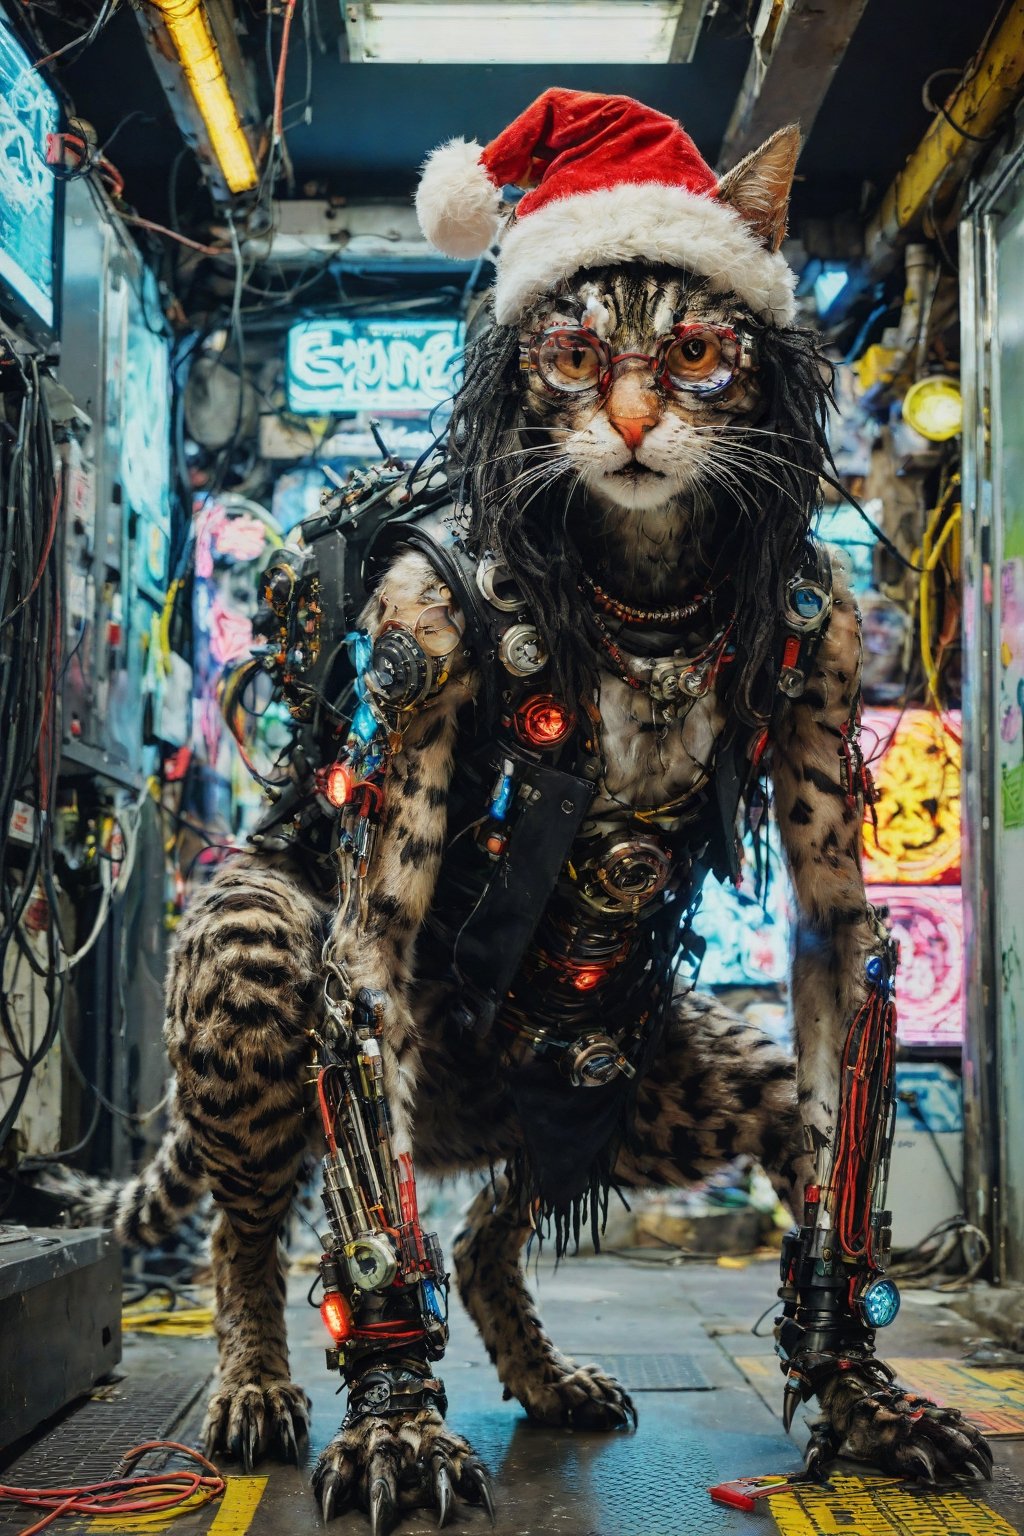 photograph, full body, wide shot, Cyborg 46 Monk (1cat) , cat is feeling lustful, it has Natural Bio Mechanical arms and large legs, dressed in techno Vest, her Vest is buttoned up, she has Black hair dreads, santa hat, Anklet, Browline glasses, complex electric christmas background, Panorama, Detailed illustration, Wonder, Ambient lighting, Orton effect, Cinestill 50, Selective focus,Extremely Realistic,monster,cyberpunk style